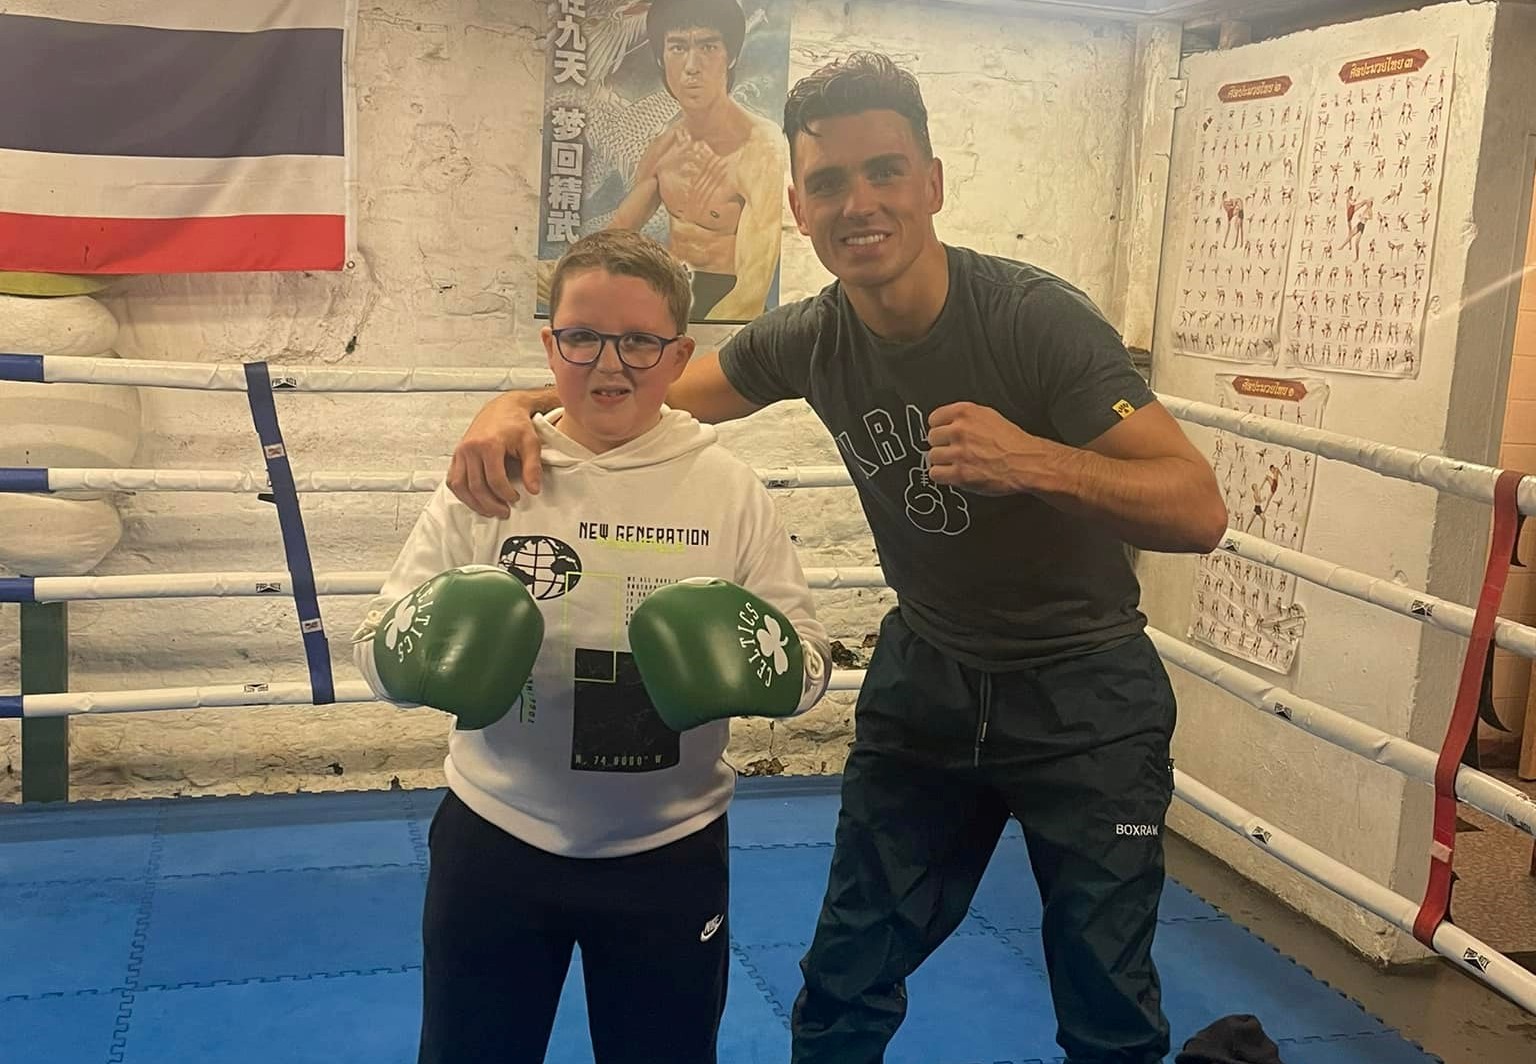 DJs Bucket List was set up by his mother, Caroline, to help him experience as many things as possible before he loses his eyesight. DJ is pictured above with boxing star Lee Reeves.